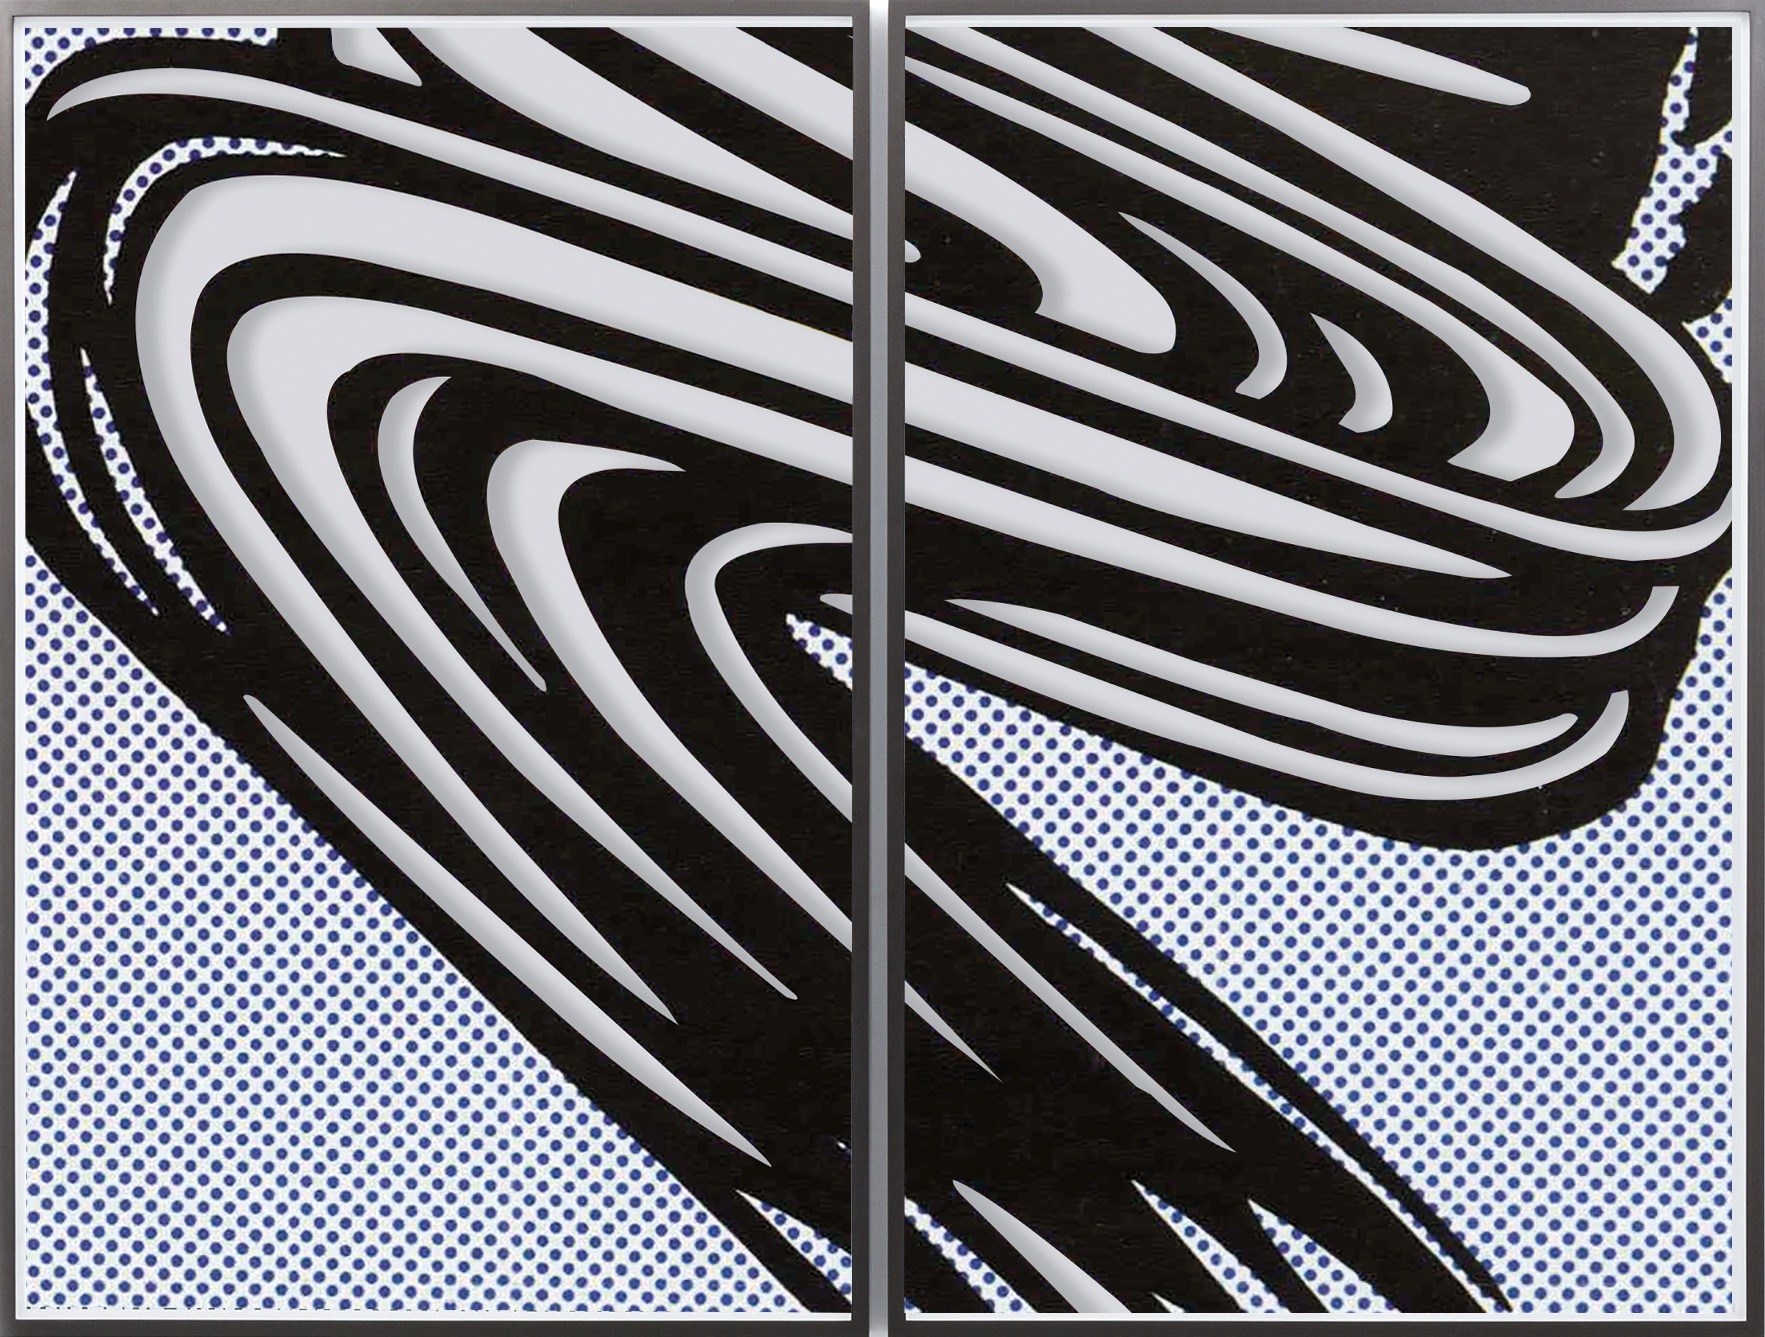 Untitled (Brushstroke), 2021
archival pigment print
paper: 88 3/16 x 55 1/8 inches (224 x 140 cm) each
framed: 90 x 56 11/16 x 3 inches (228.6 x 144 x 7.6 cm) each
overall: 90 x 114 5/8 x 3 inches (228.6 x 291.1 x 7.6 cm)
edition of 4 with 1 AP, JDa-21.19.1&amp;nbsp;